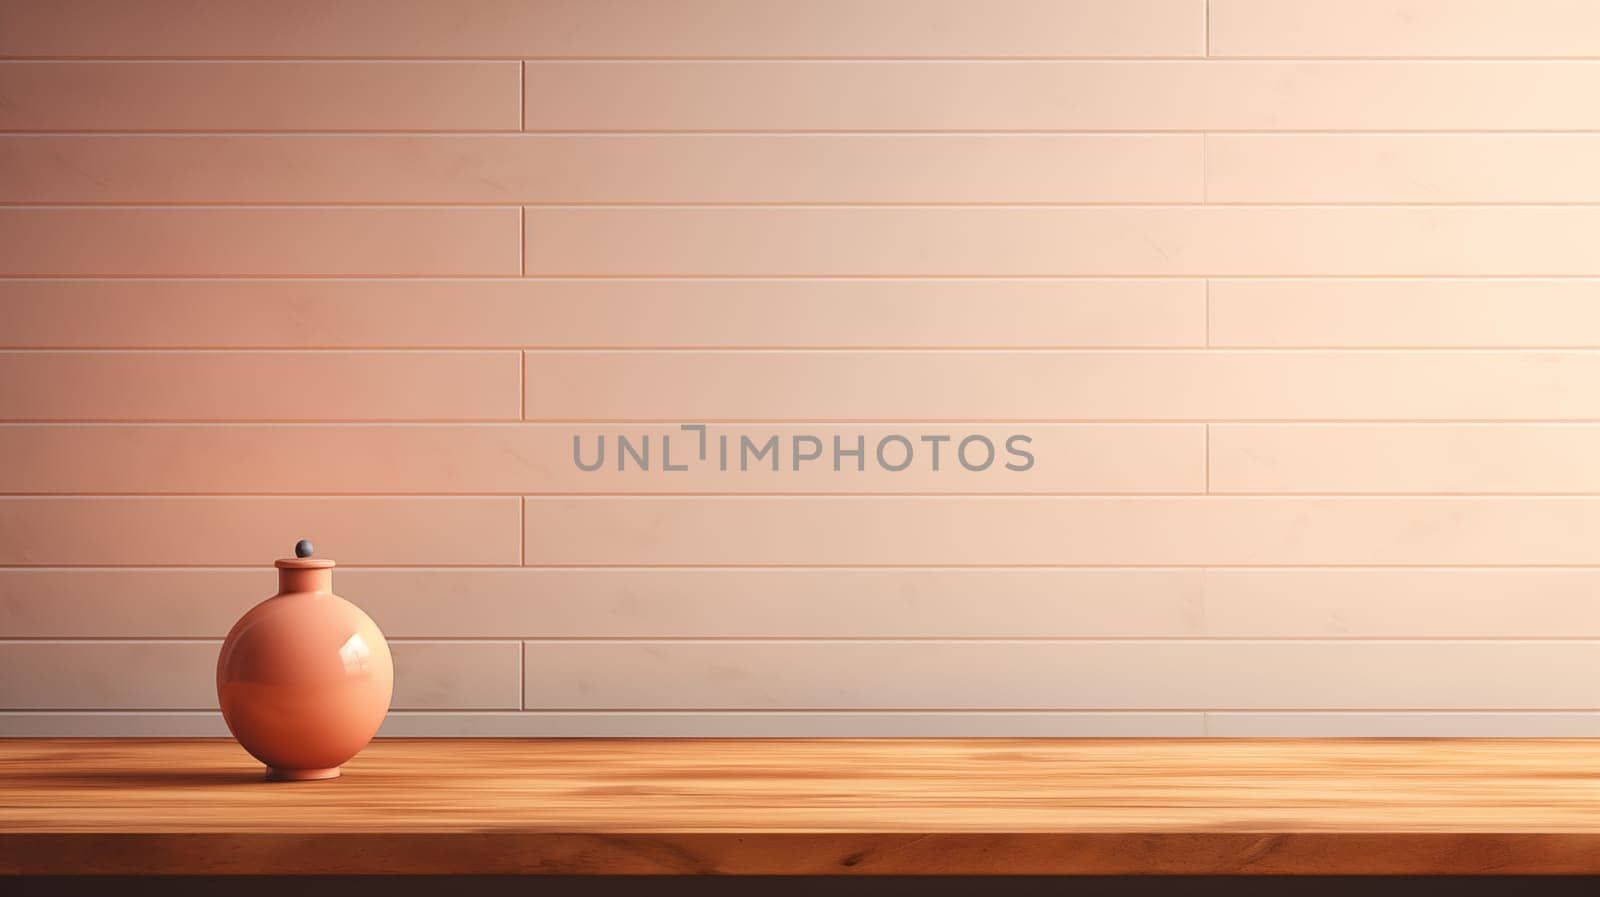 wooden countertop with a vase, against the background of a peach-color wall.Place for your product